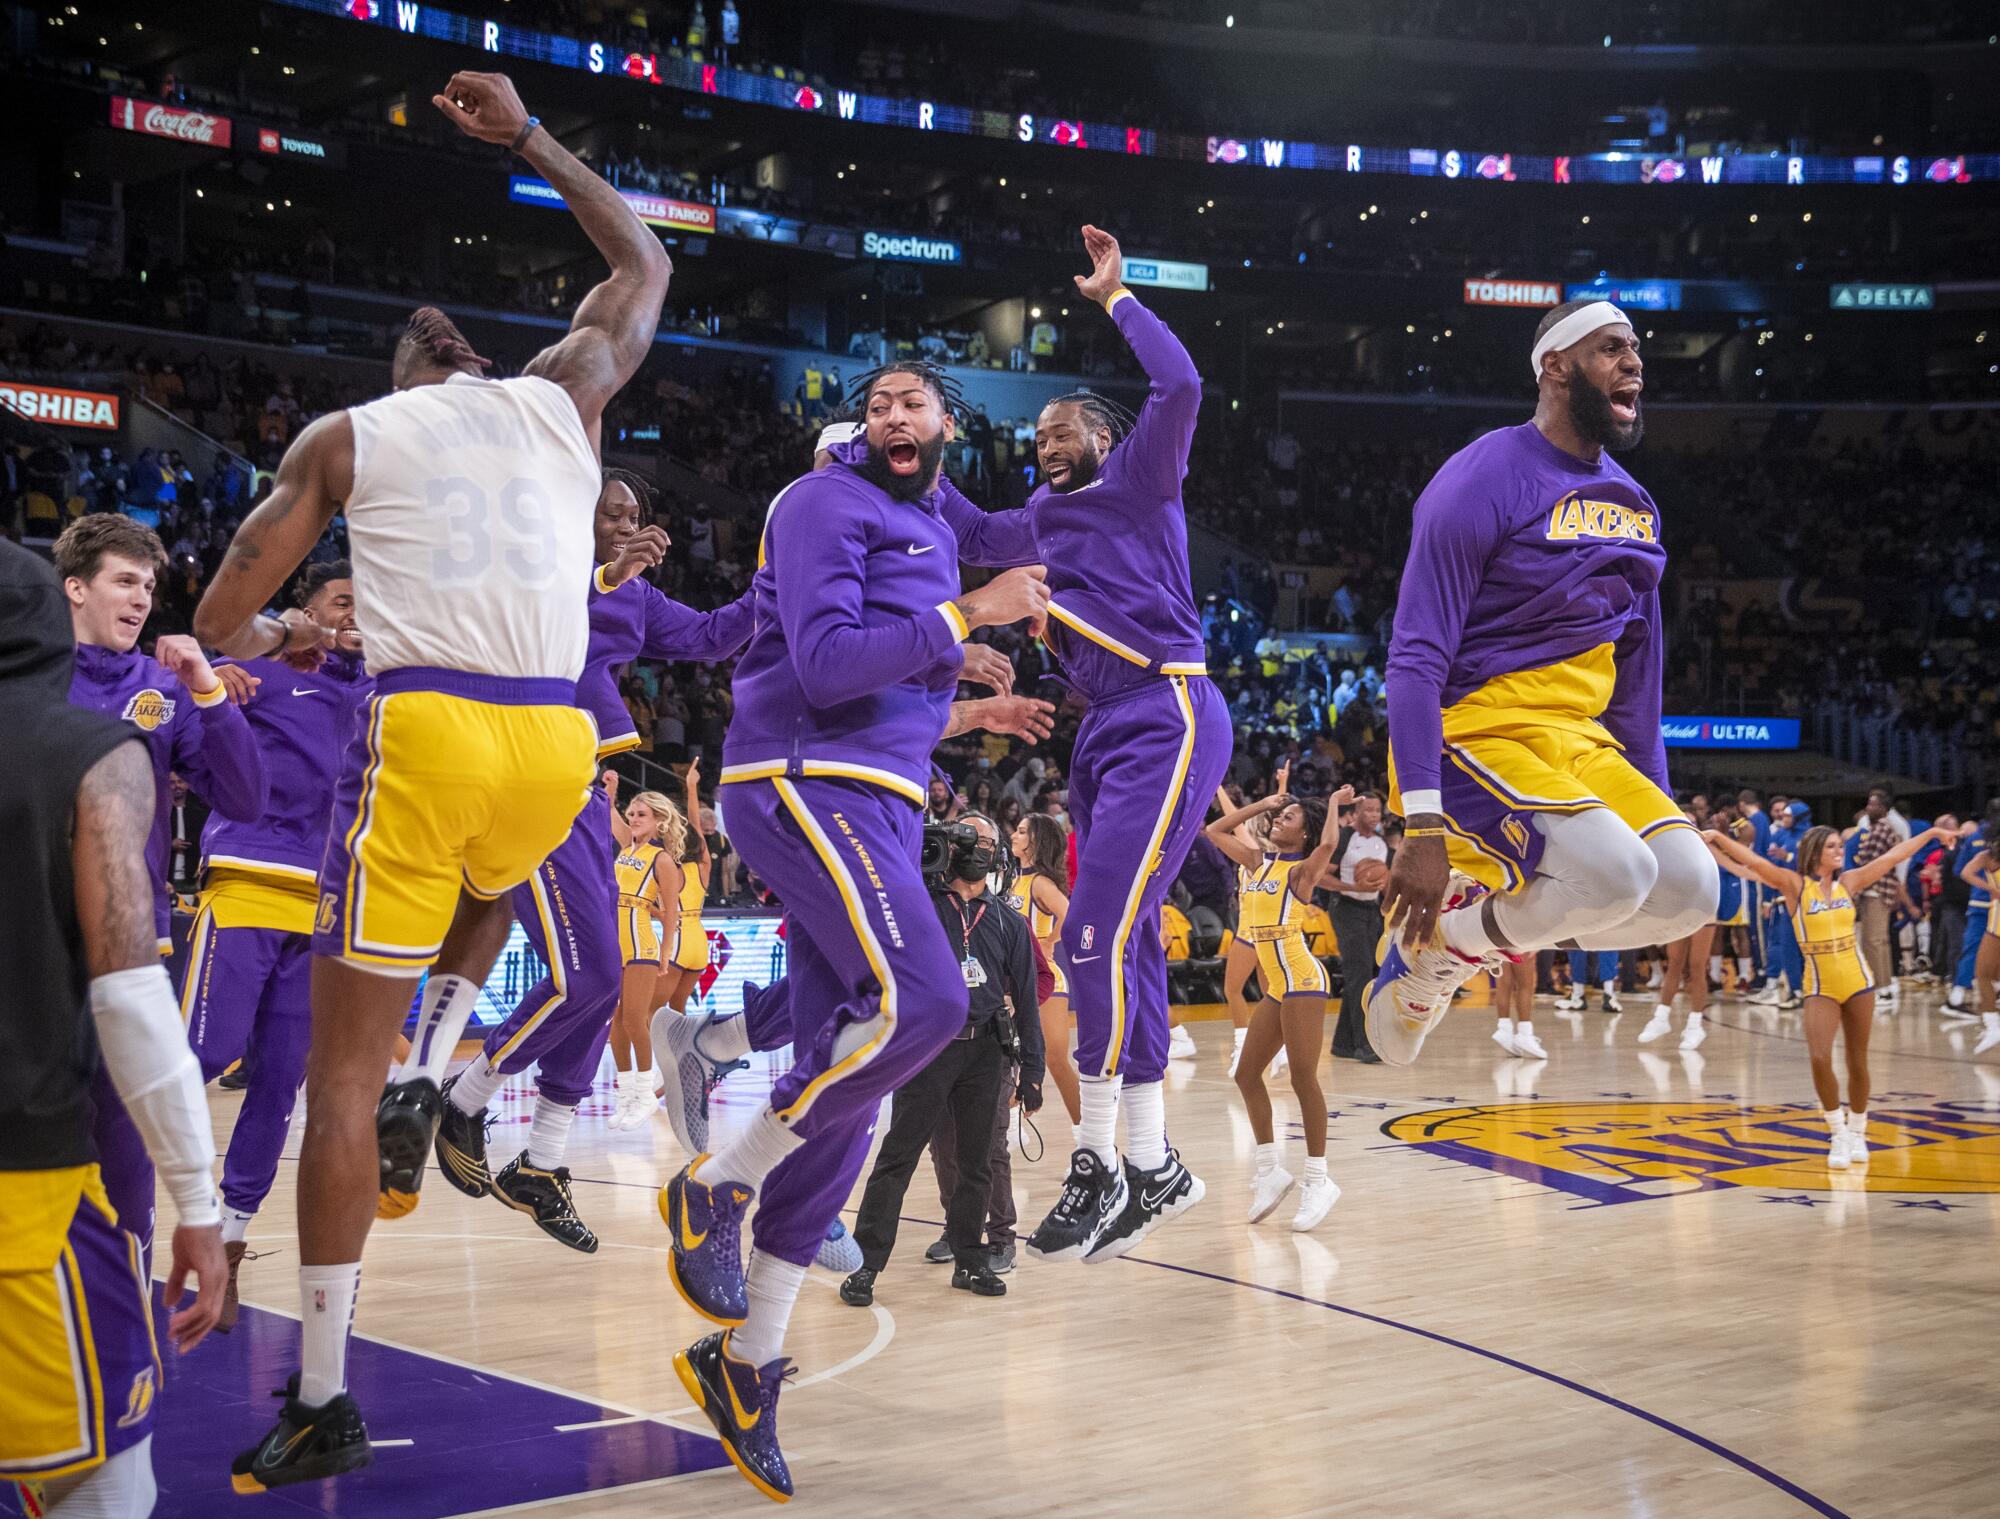 Basketball players in purple-and-yellow uniforms jump on the court 